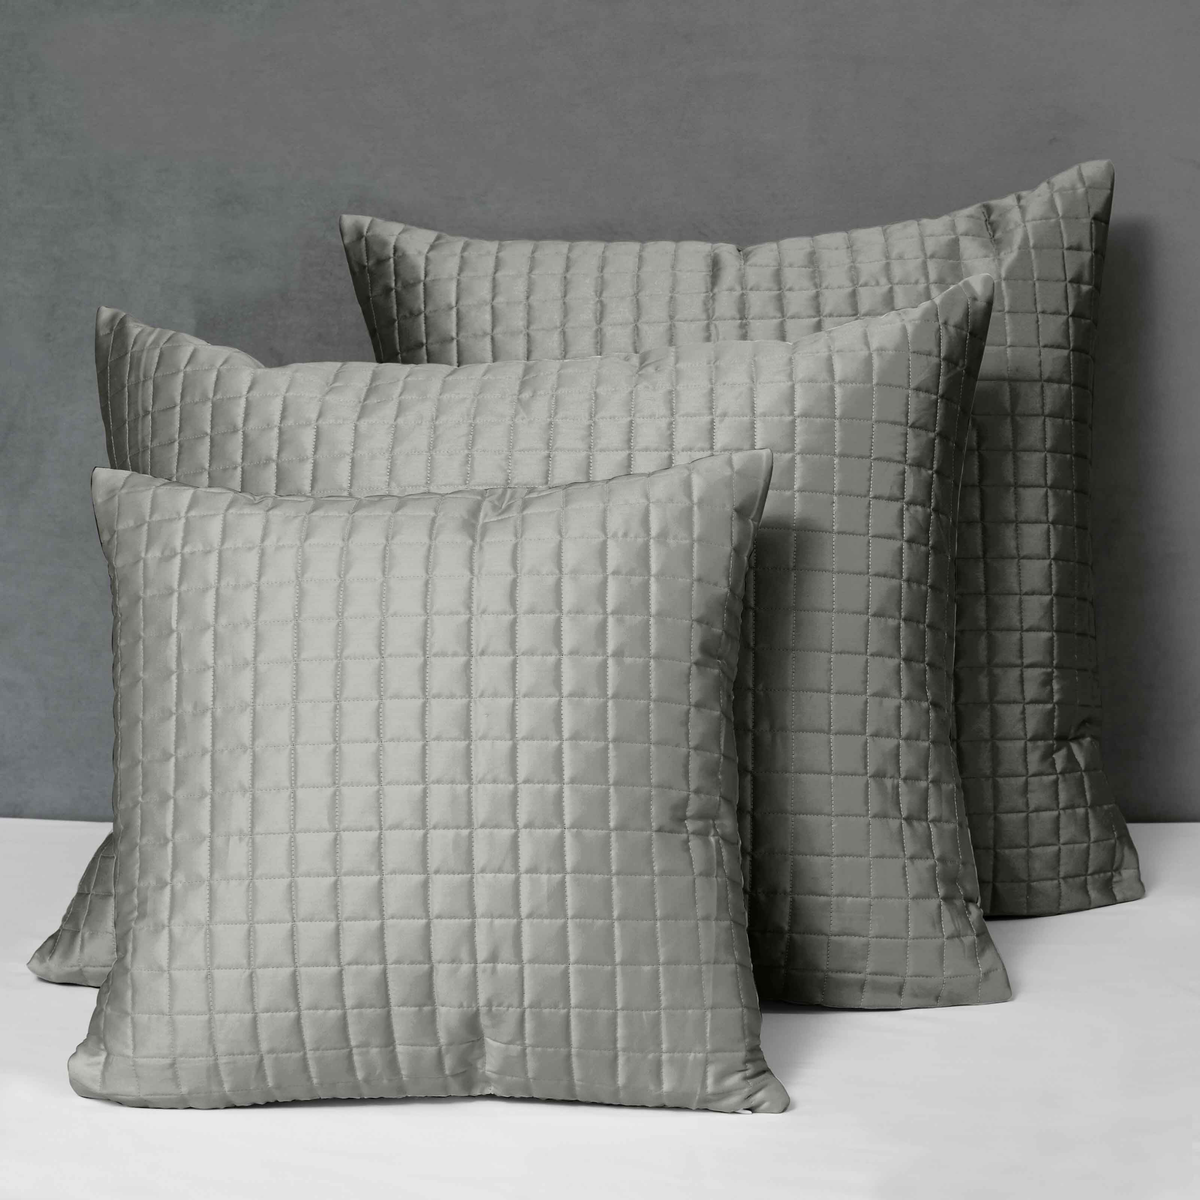 Different Sizes of Quilted Shams of Signoria Masaccio Bedding in Lead Grey Color